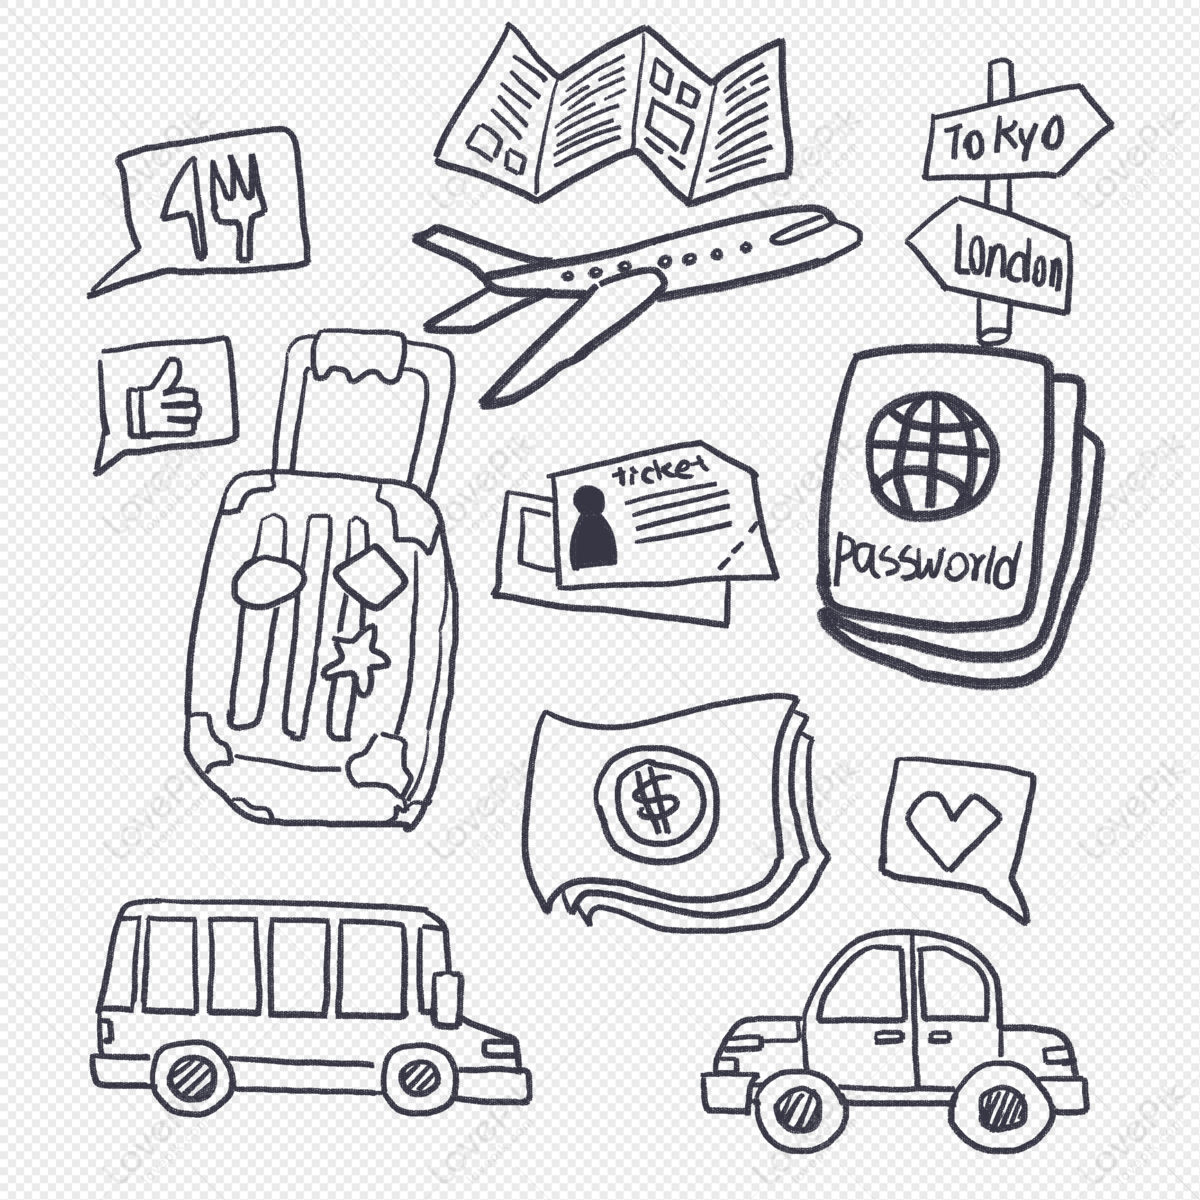 Travel stick figure collection, travel vector, cartoon travel, collections png hd transparent image